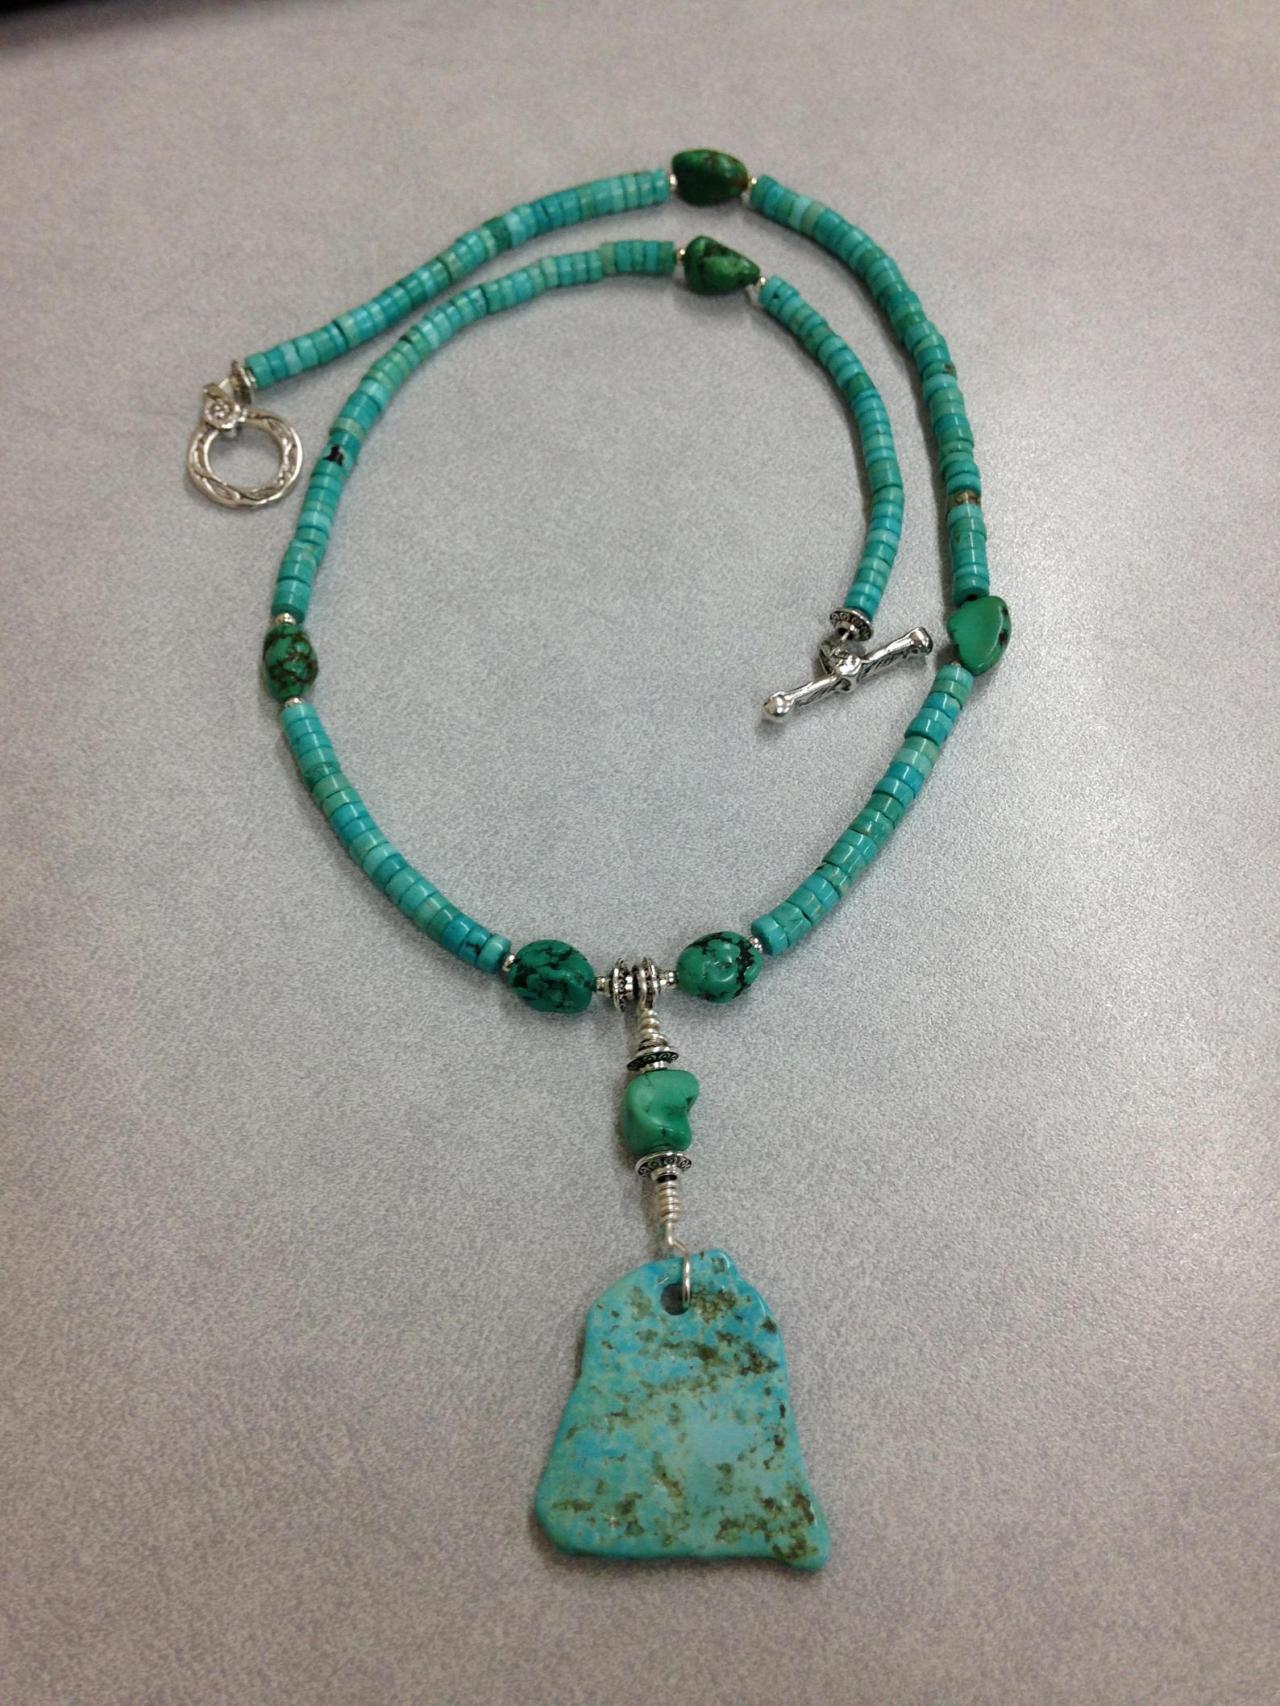 Beaded Turquoise Necklace With Turquoise Pendant